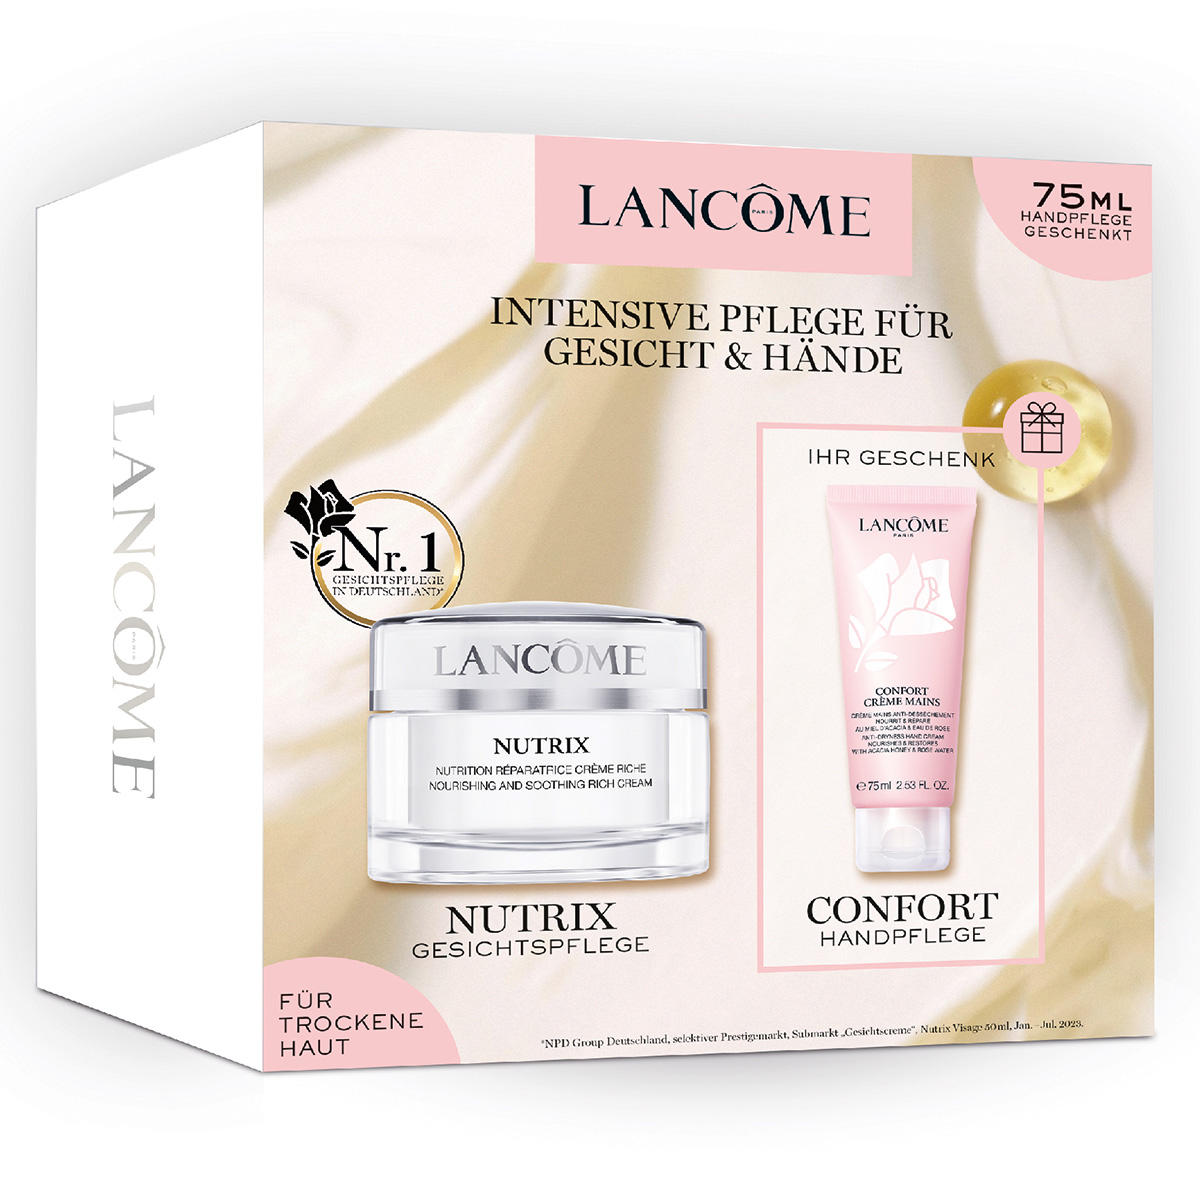 Confort Creme Mains: Hand Cream for Dry Hands - Lancôme